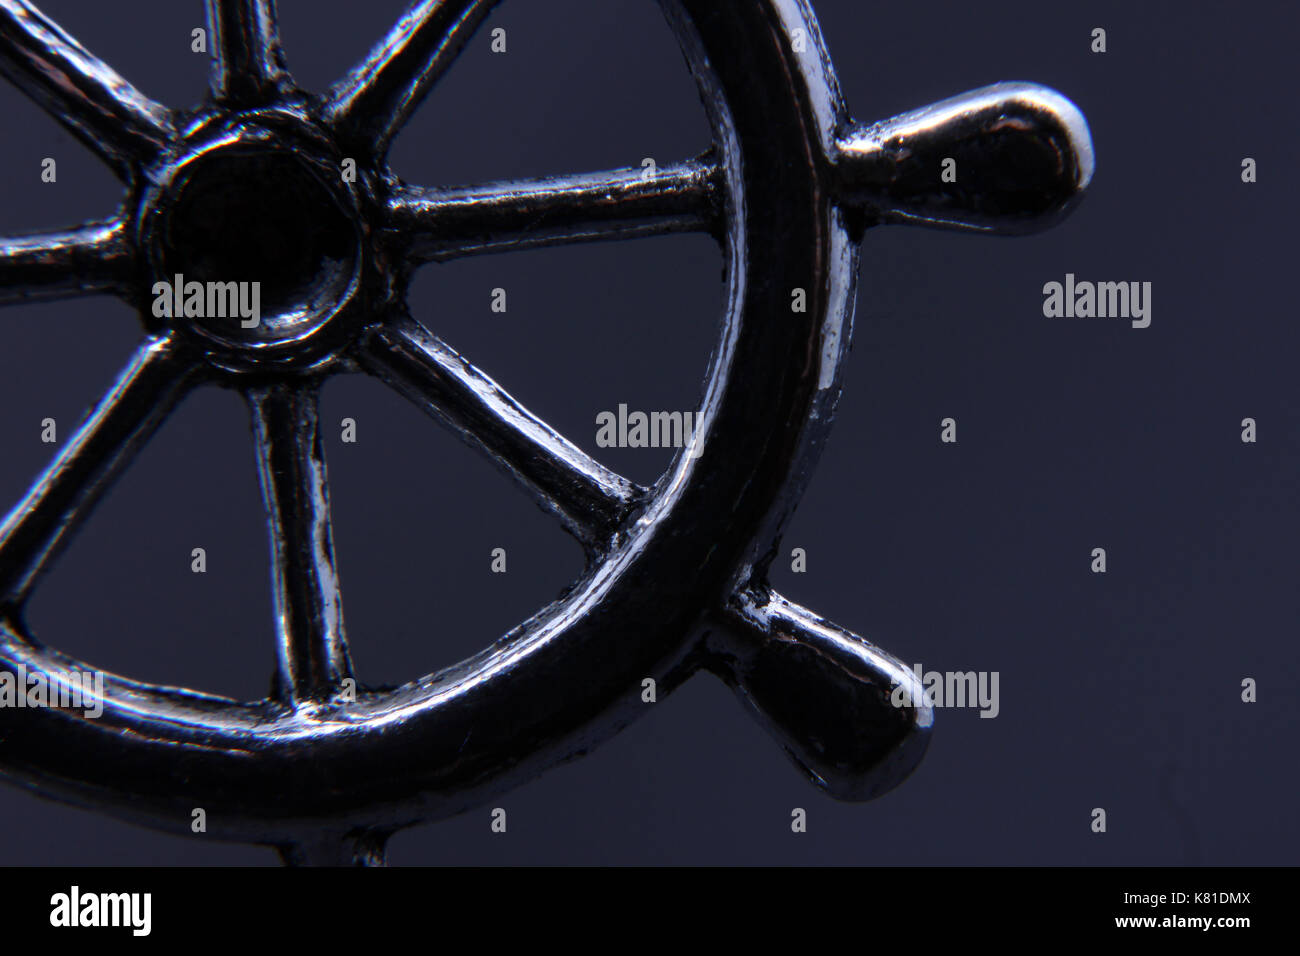 steuerrad eines bootes aus metall als schmuck, steering wheel of a boat made of metal as jewelry Stock Photo